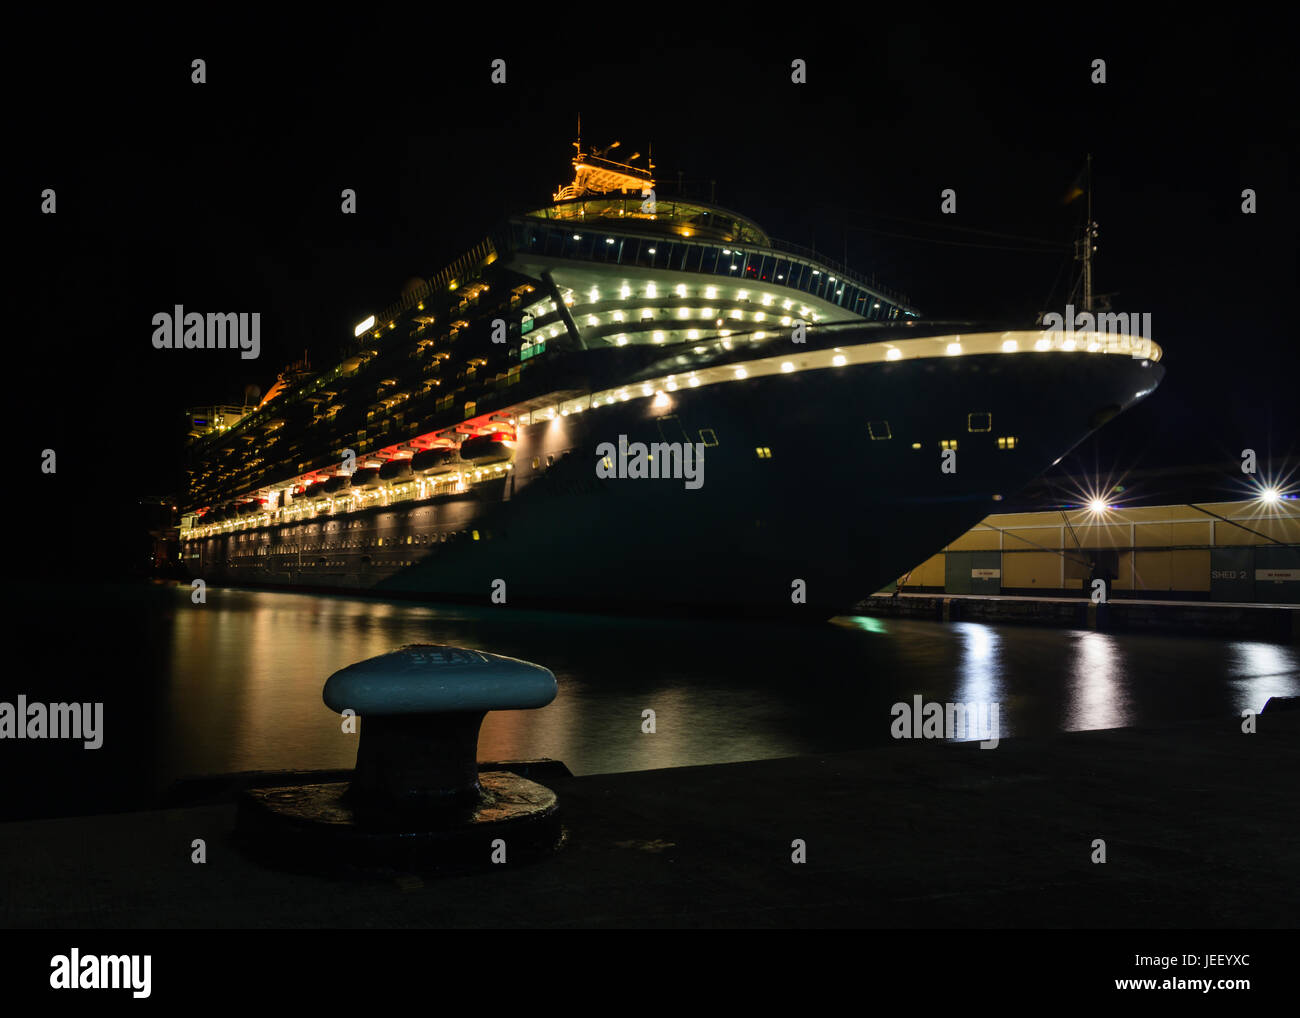 Cruise Ship Docked Barbados High Resolution Photography and Images - Alamy